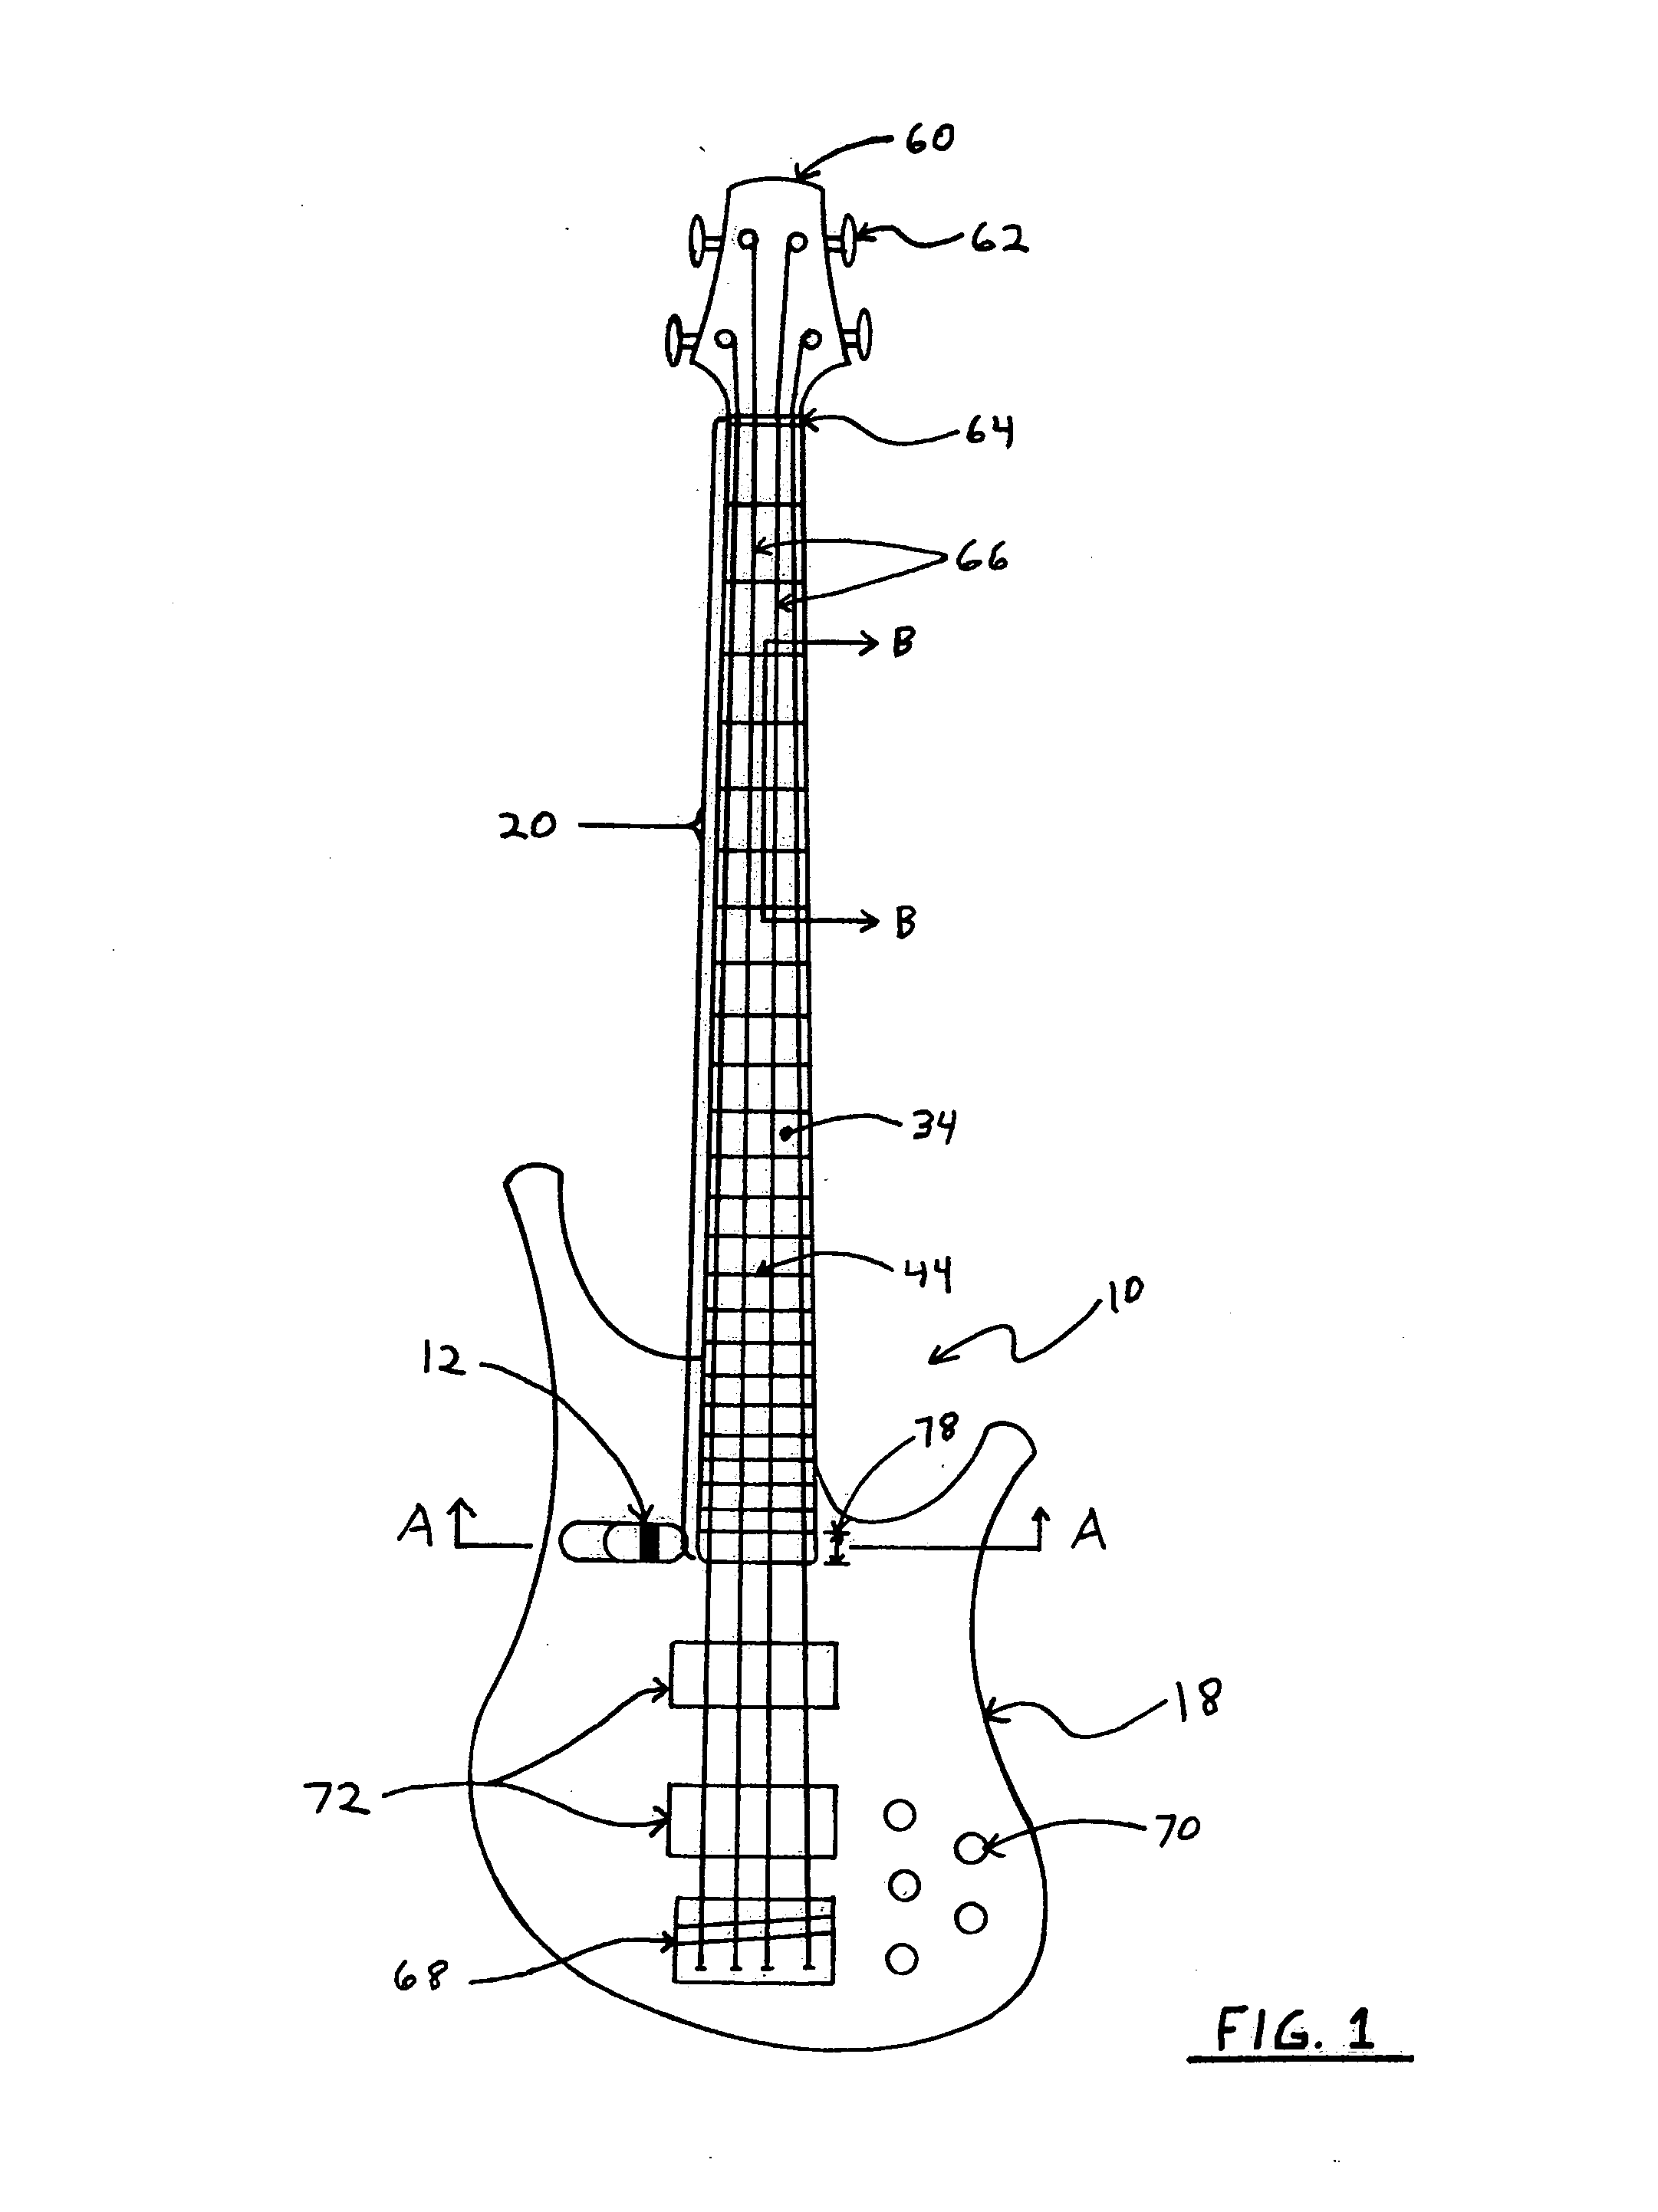 Stringed musical instrument convertible between fretted and fretless playing configurations